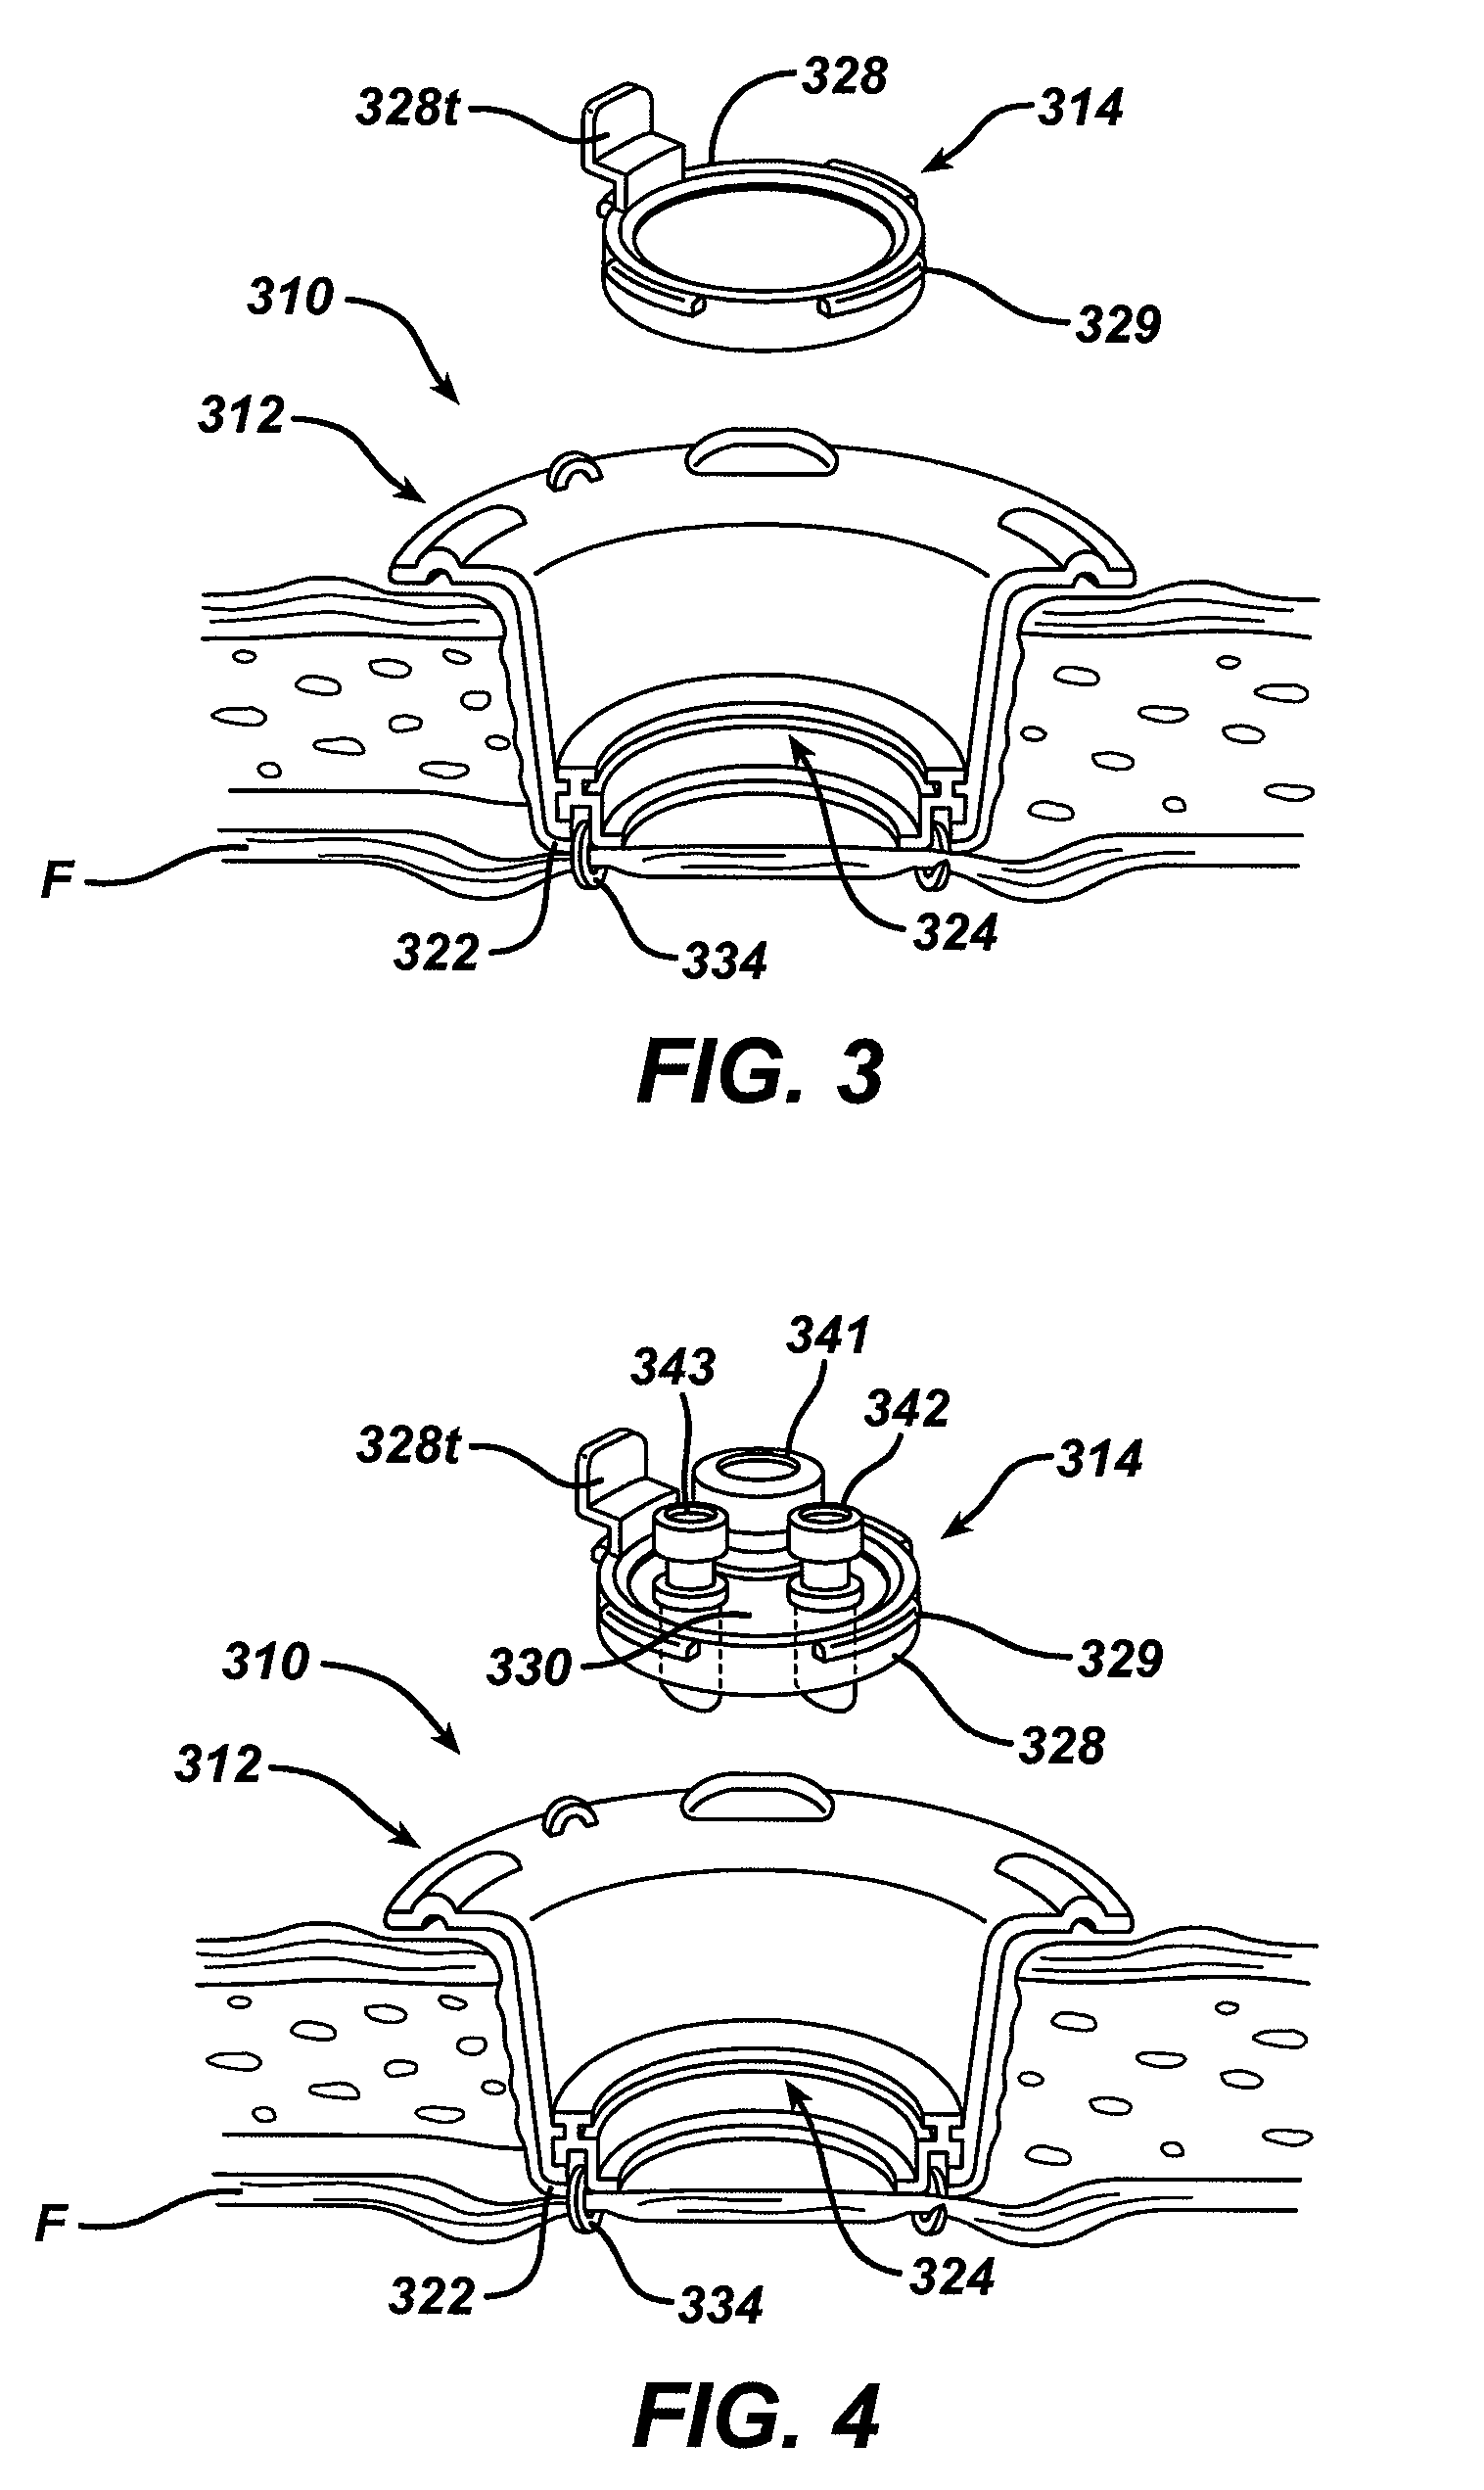 Methods and devices for accessing a body cavity using a surgical access device with modular seal components